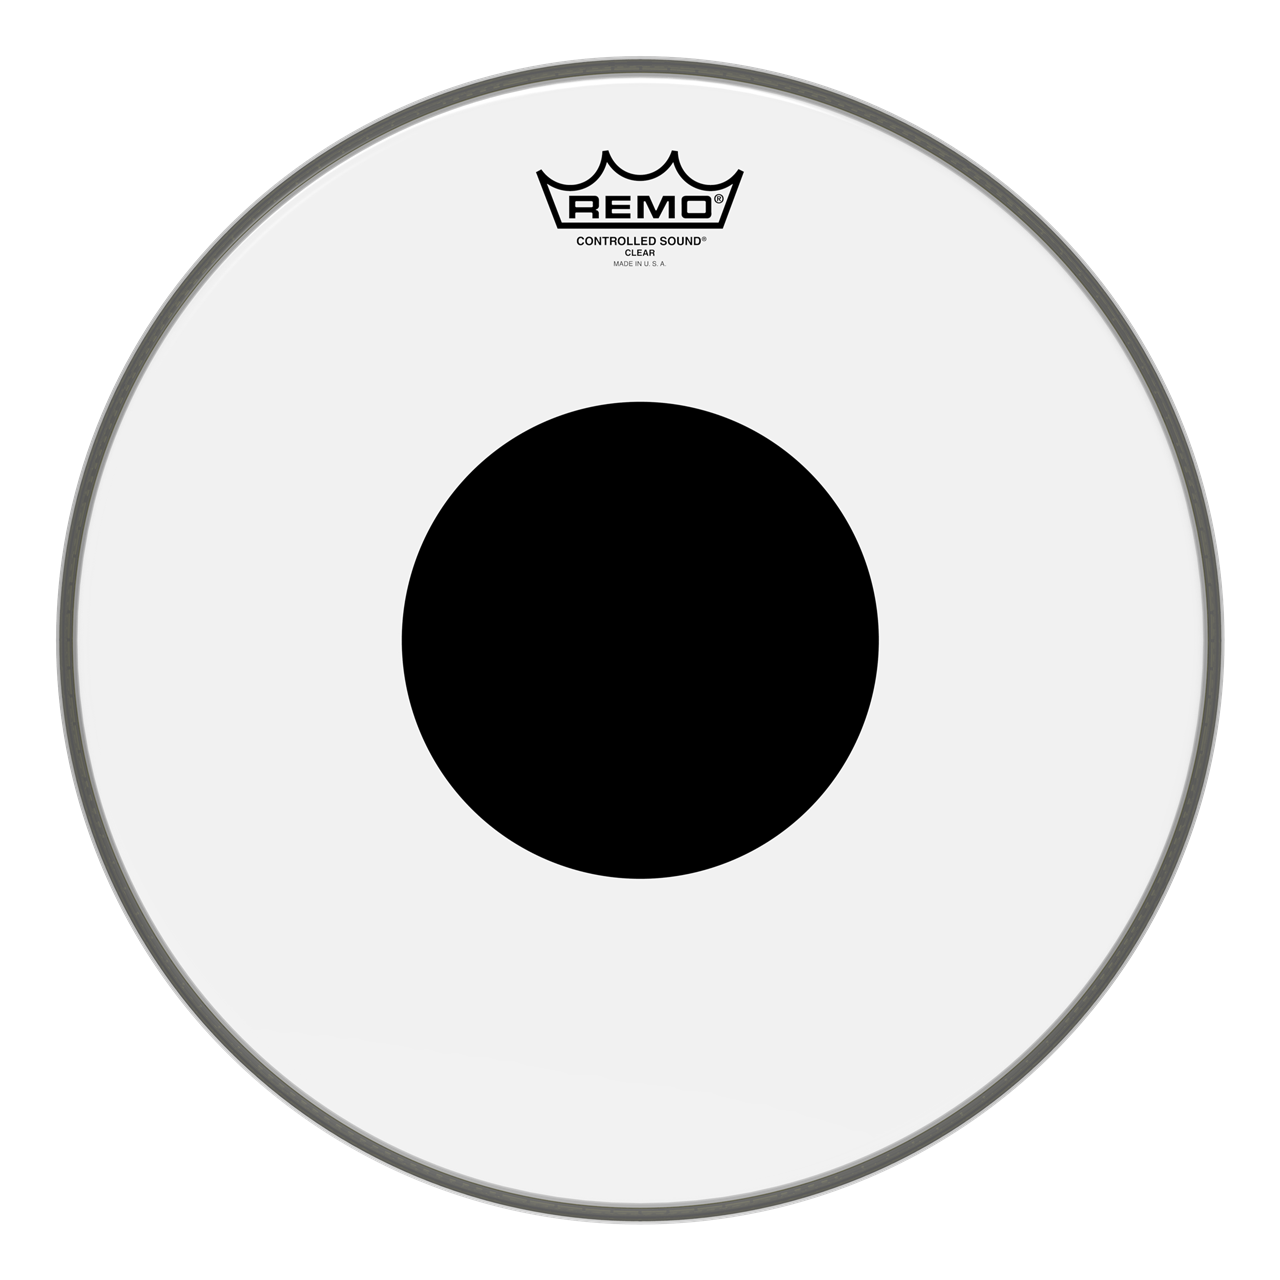 Remo CS-0318-10 Controlled Sound, 18" Clear, Black Dot